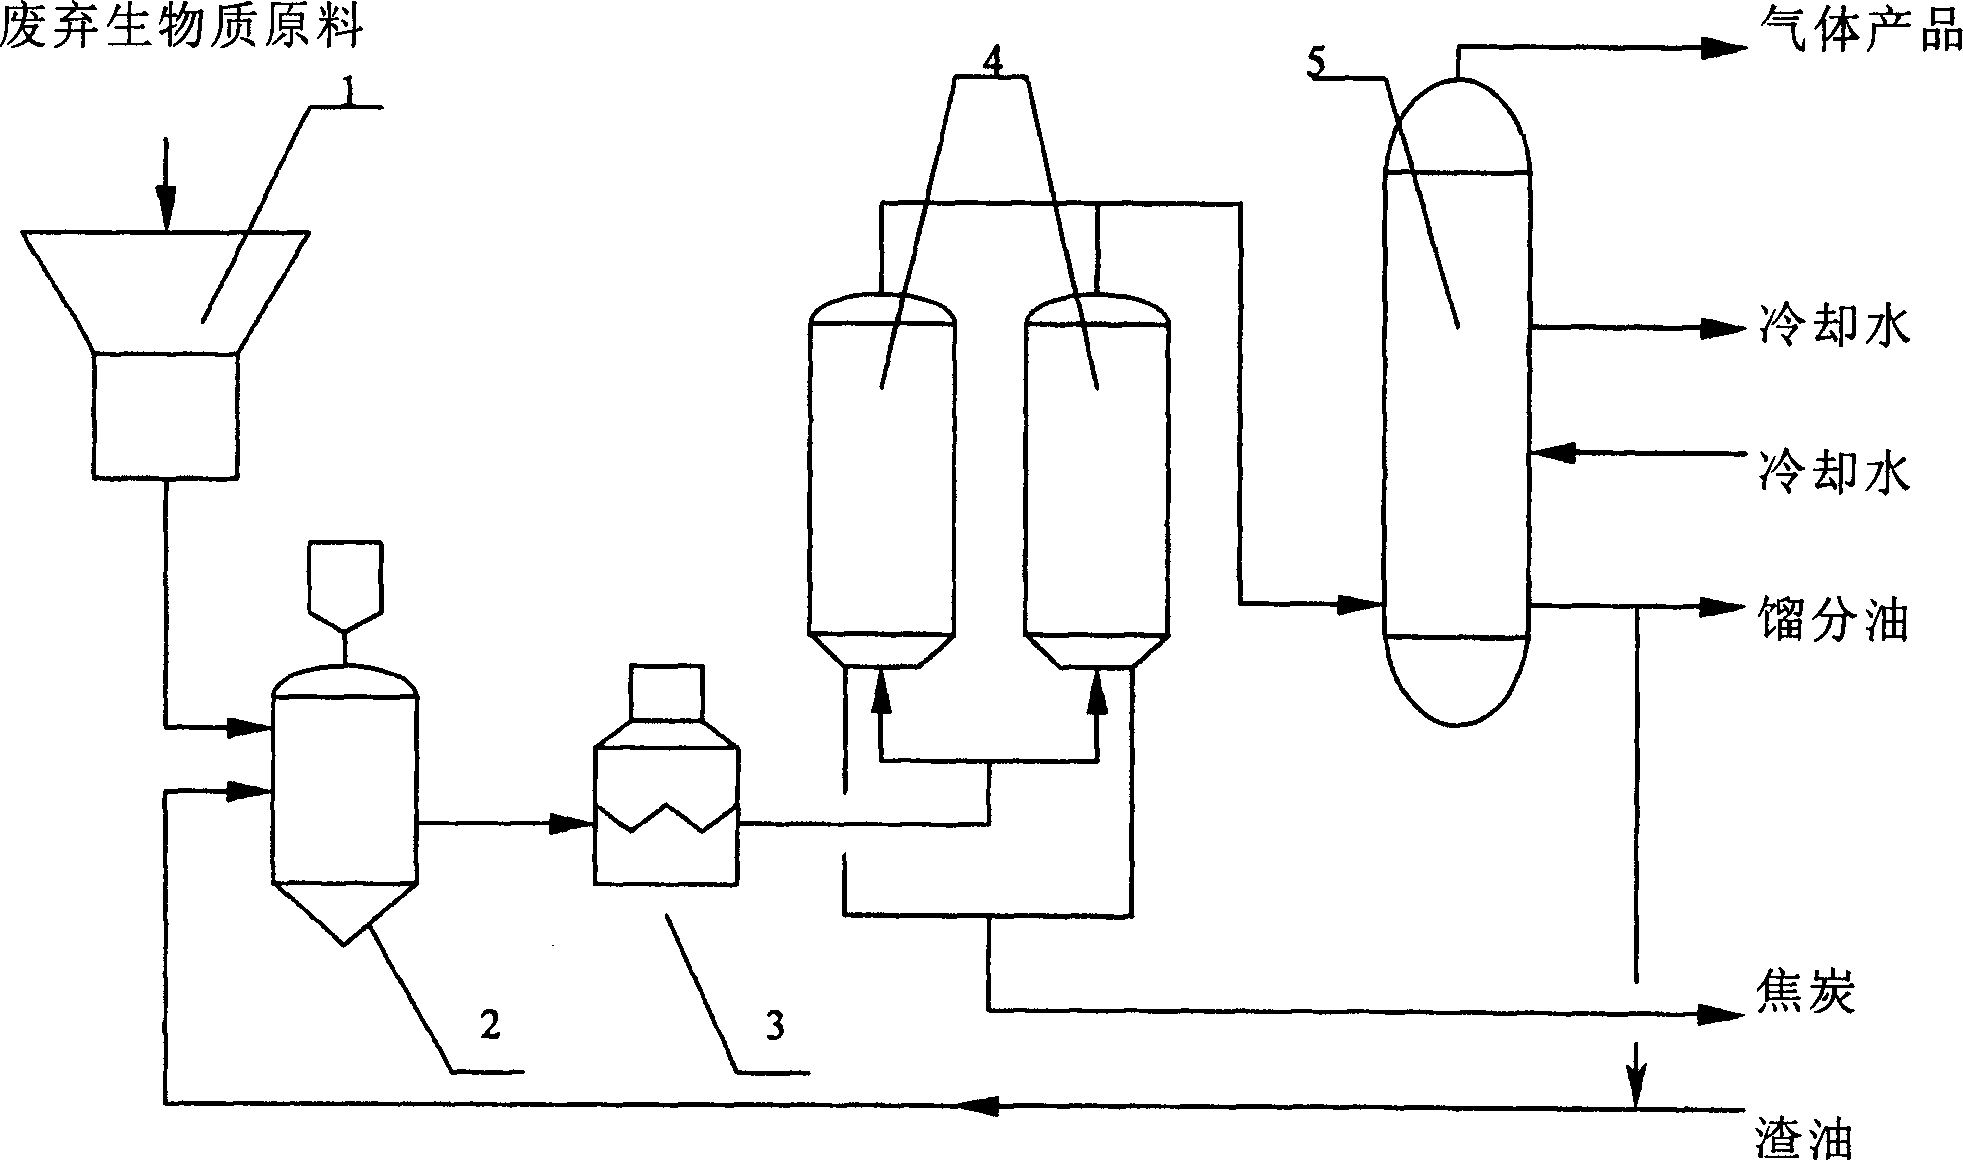 Delayed coking treatment method for waste biomass